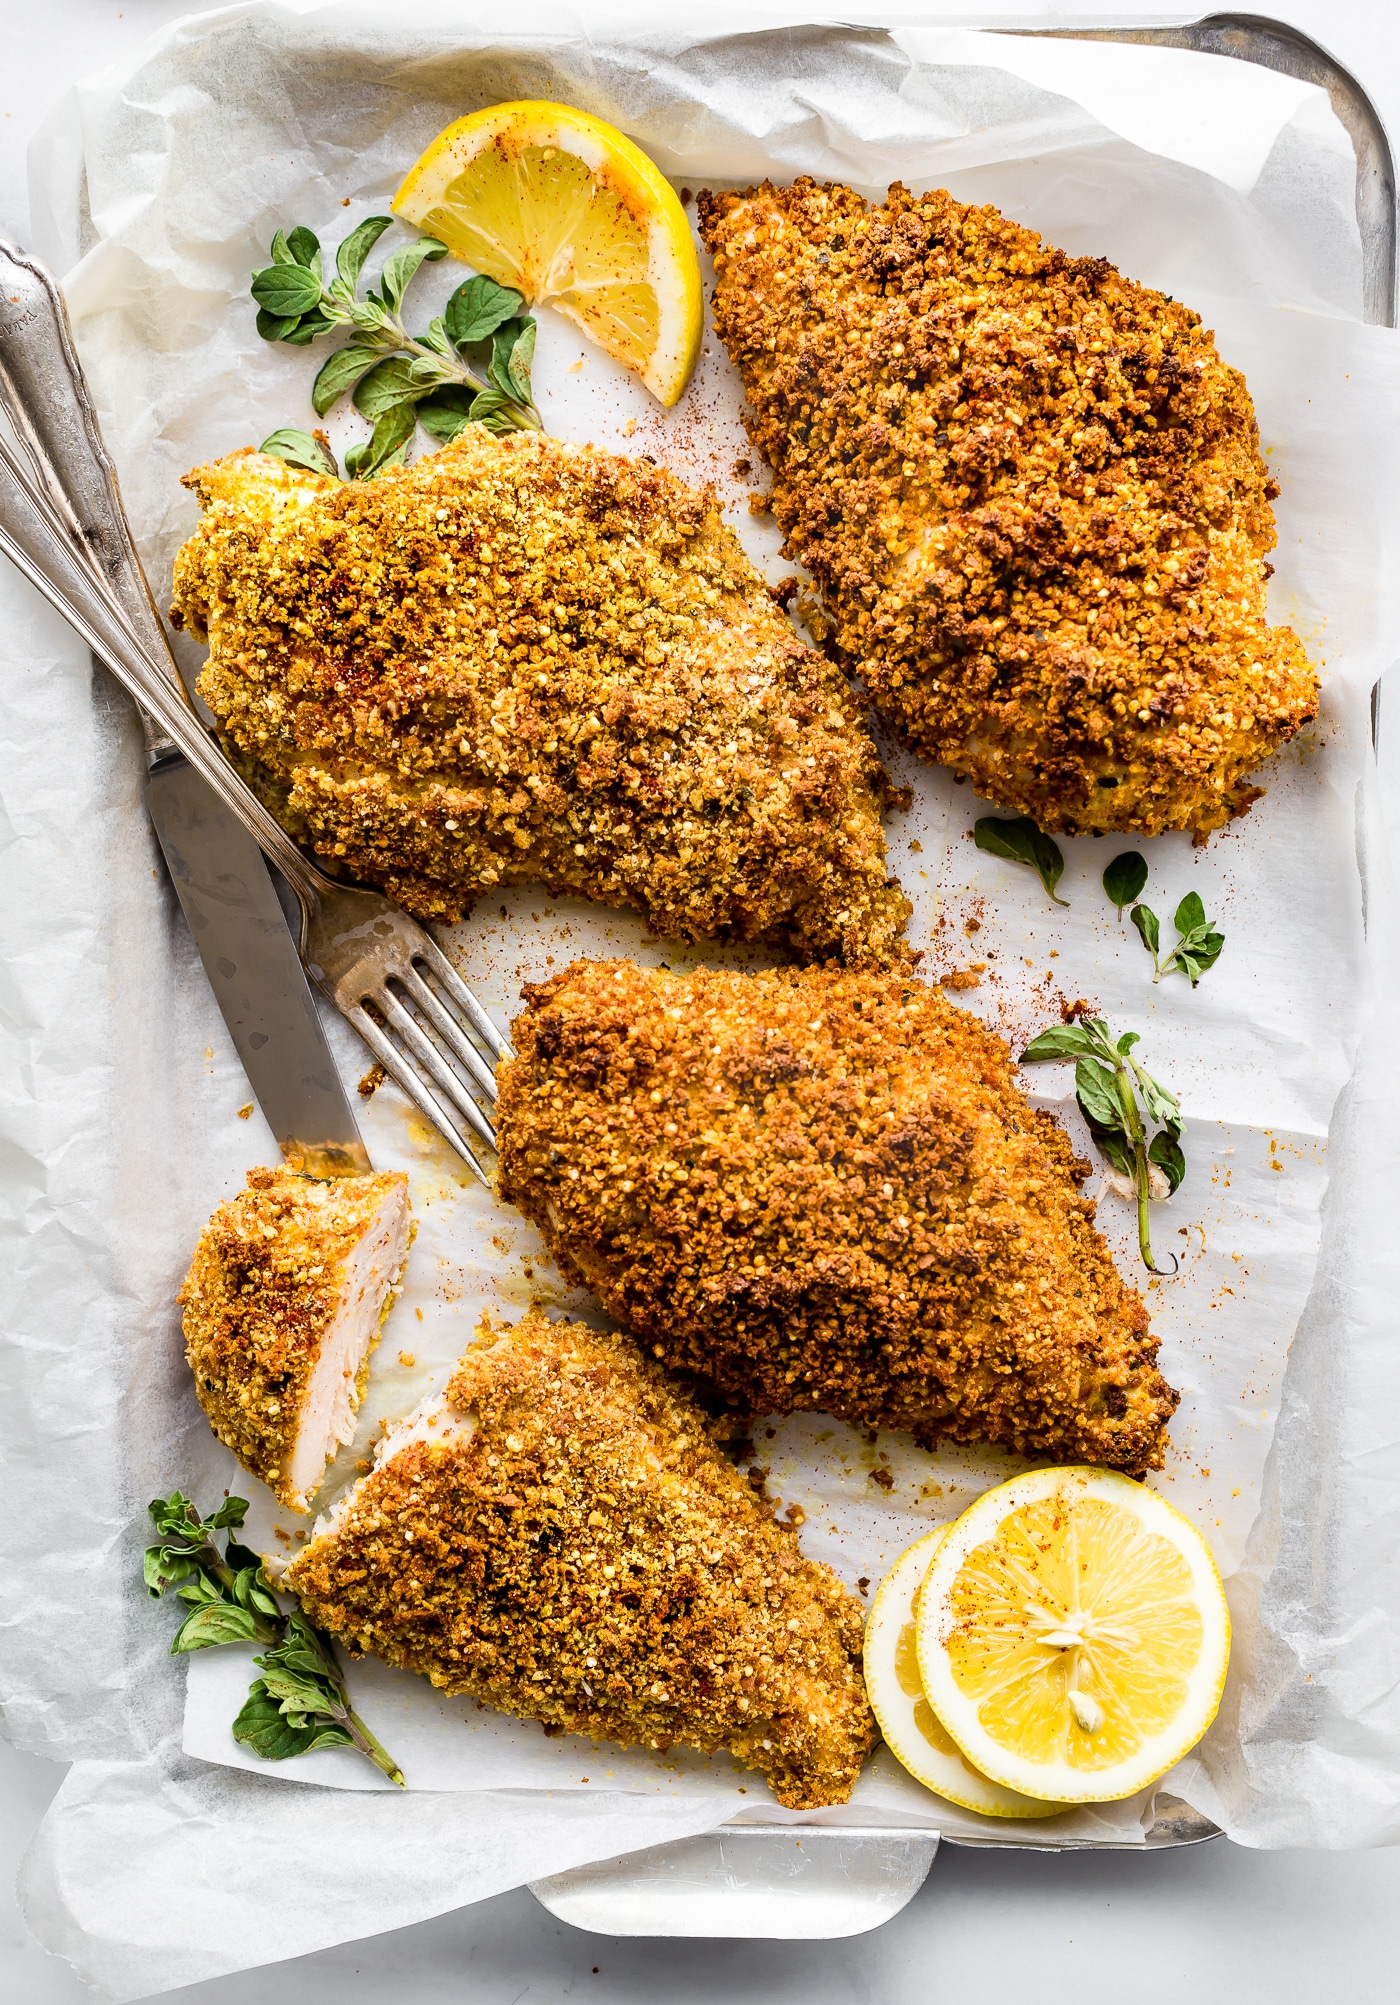 Gluten-Free Panko Crusted Paprika Chicken! This baked crusted chicken recipe is simple to make with gluten-free panko bread crumbs and paprika spices! Bake it with veggies for an easy one pan meal or by itself. Either way, a healthy gluten-free dinner is ready in under 45 minutes! Perfect for entertaining guests or feeding the family.